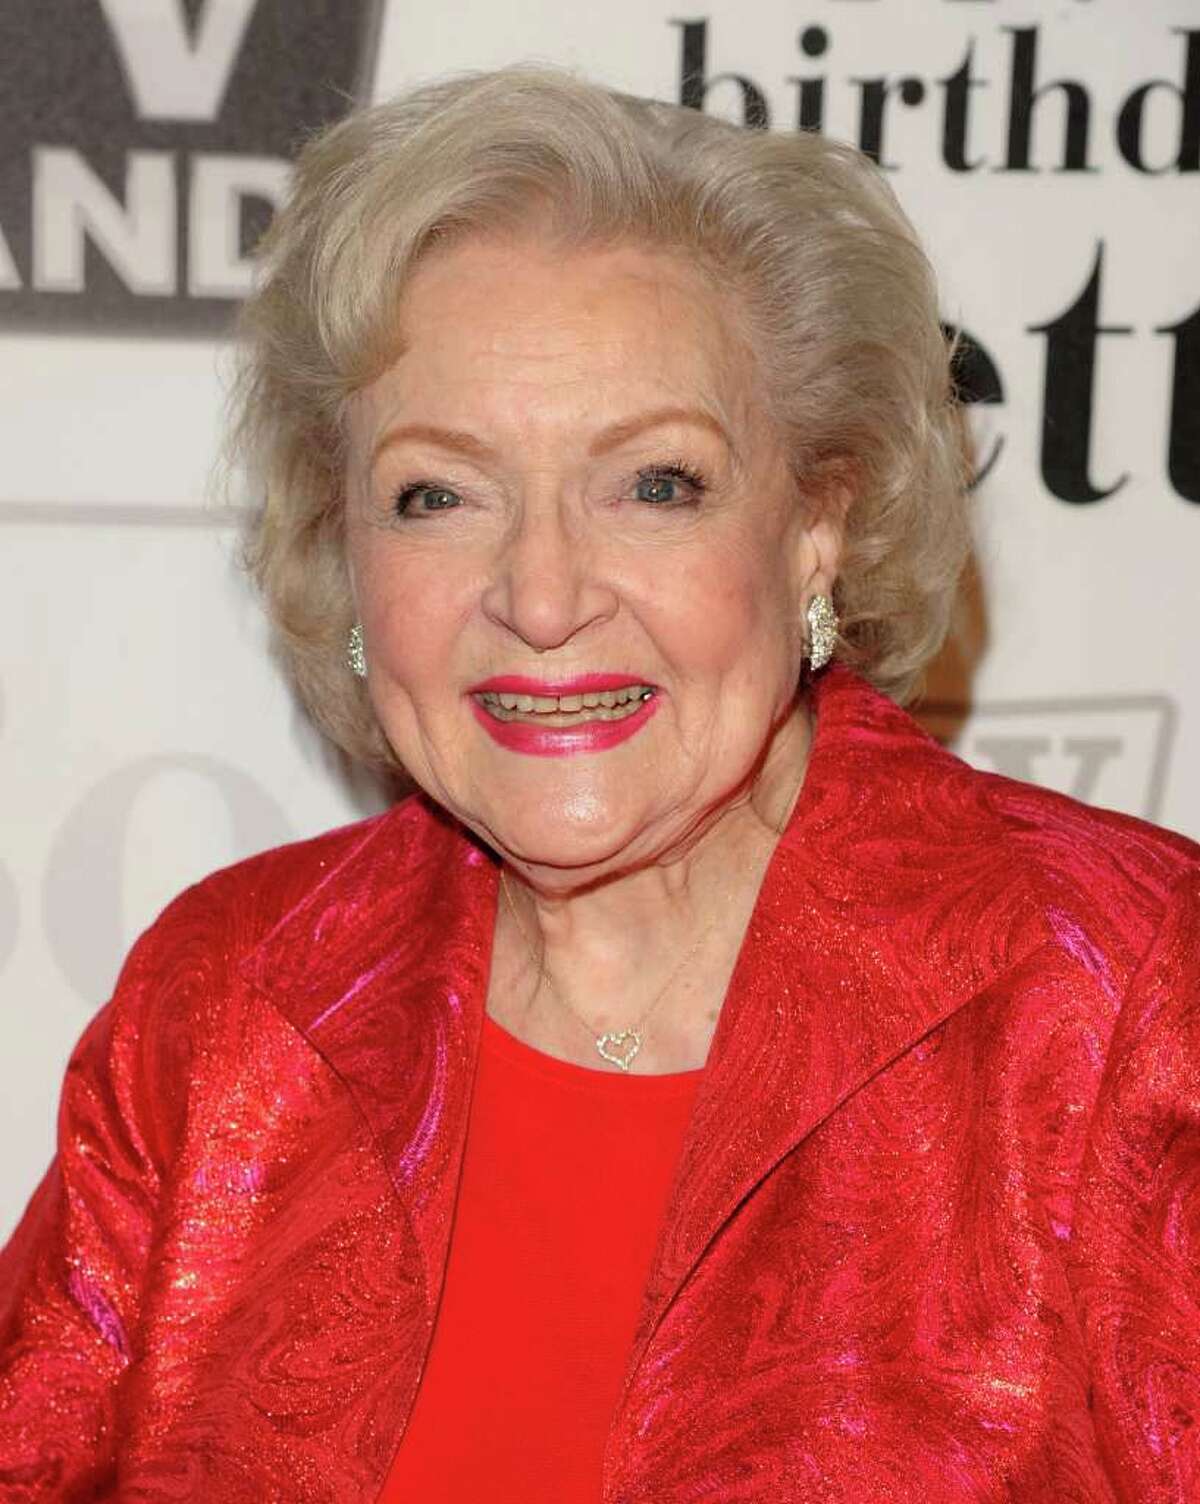 Actress Betty White attends her 89th Birthday celebration hosted by TV Land, in New York, on Tuesday, Jan. 18, 2011.